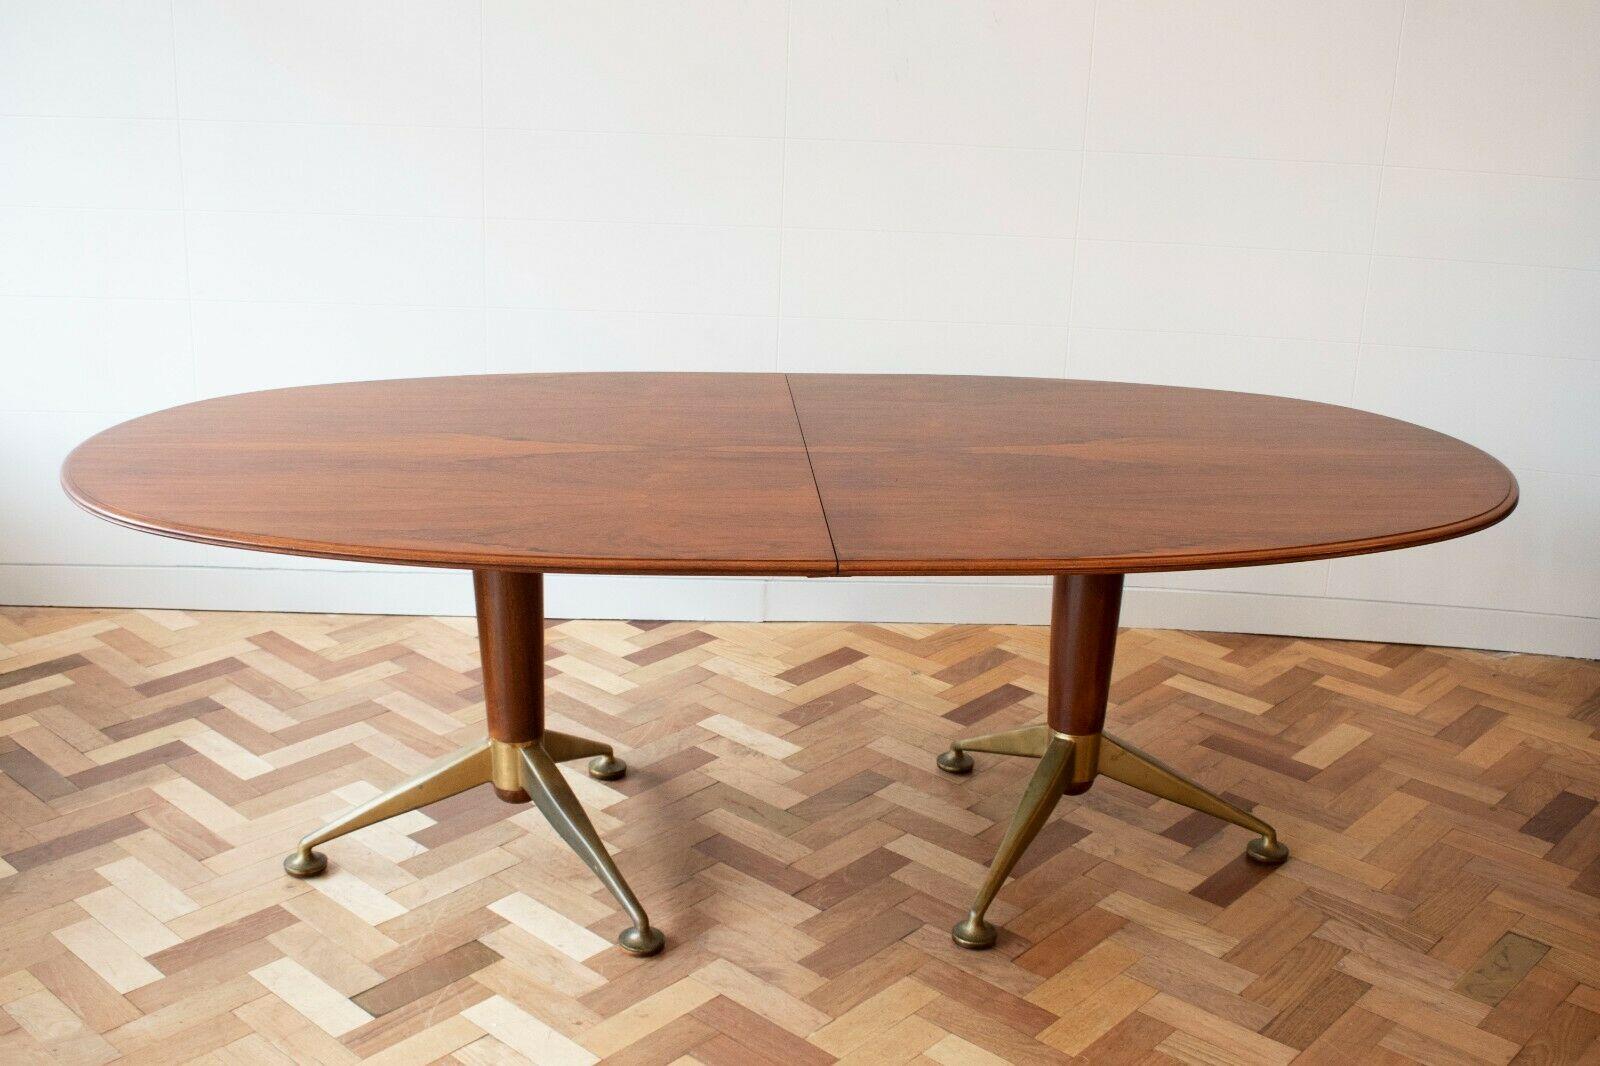 British 1950s Rosewood Dining Table with Brass Feet by Andrew J Milne for Heals London